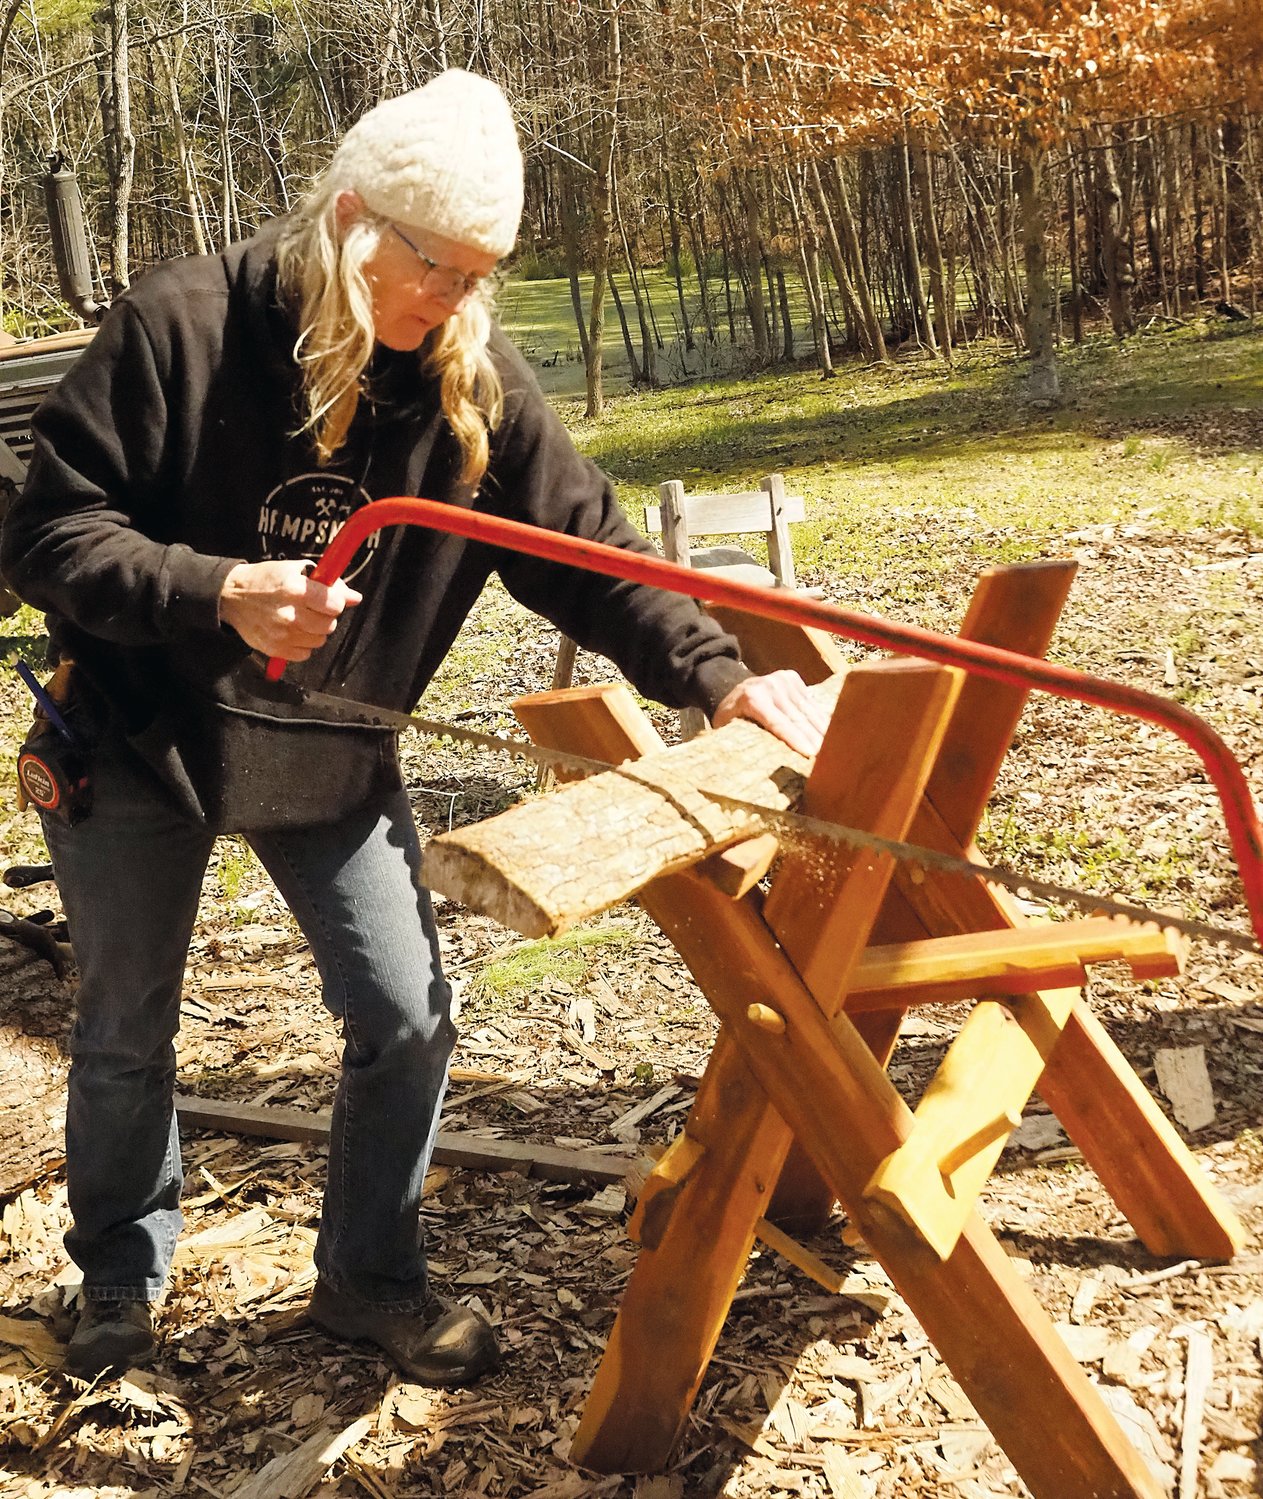 Festival organizer Cara O'Connell shown practicing the art of woodworking.